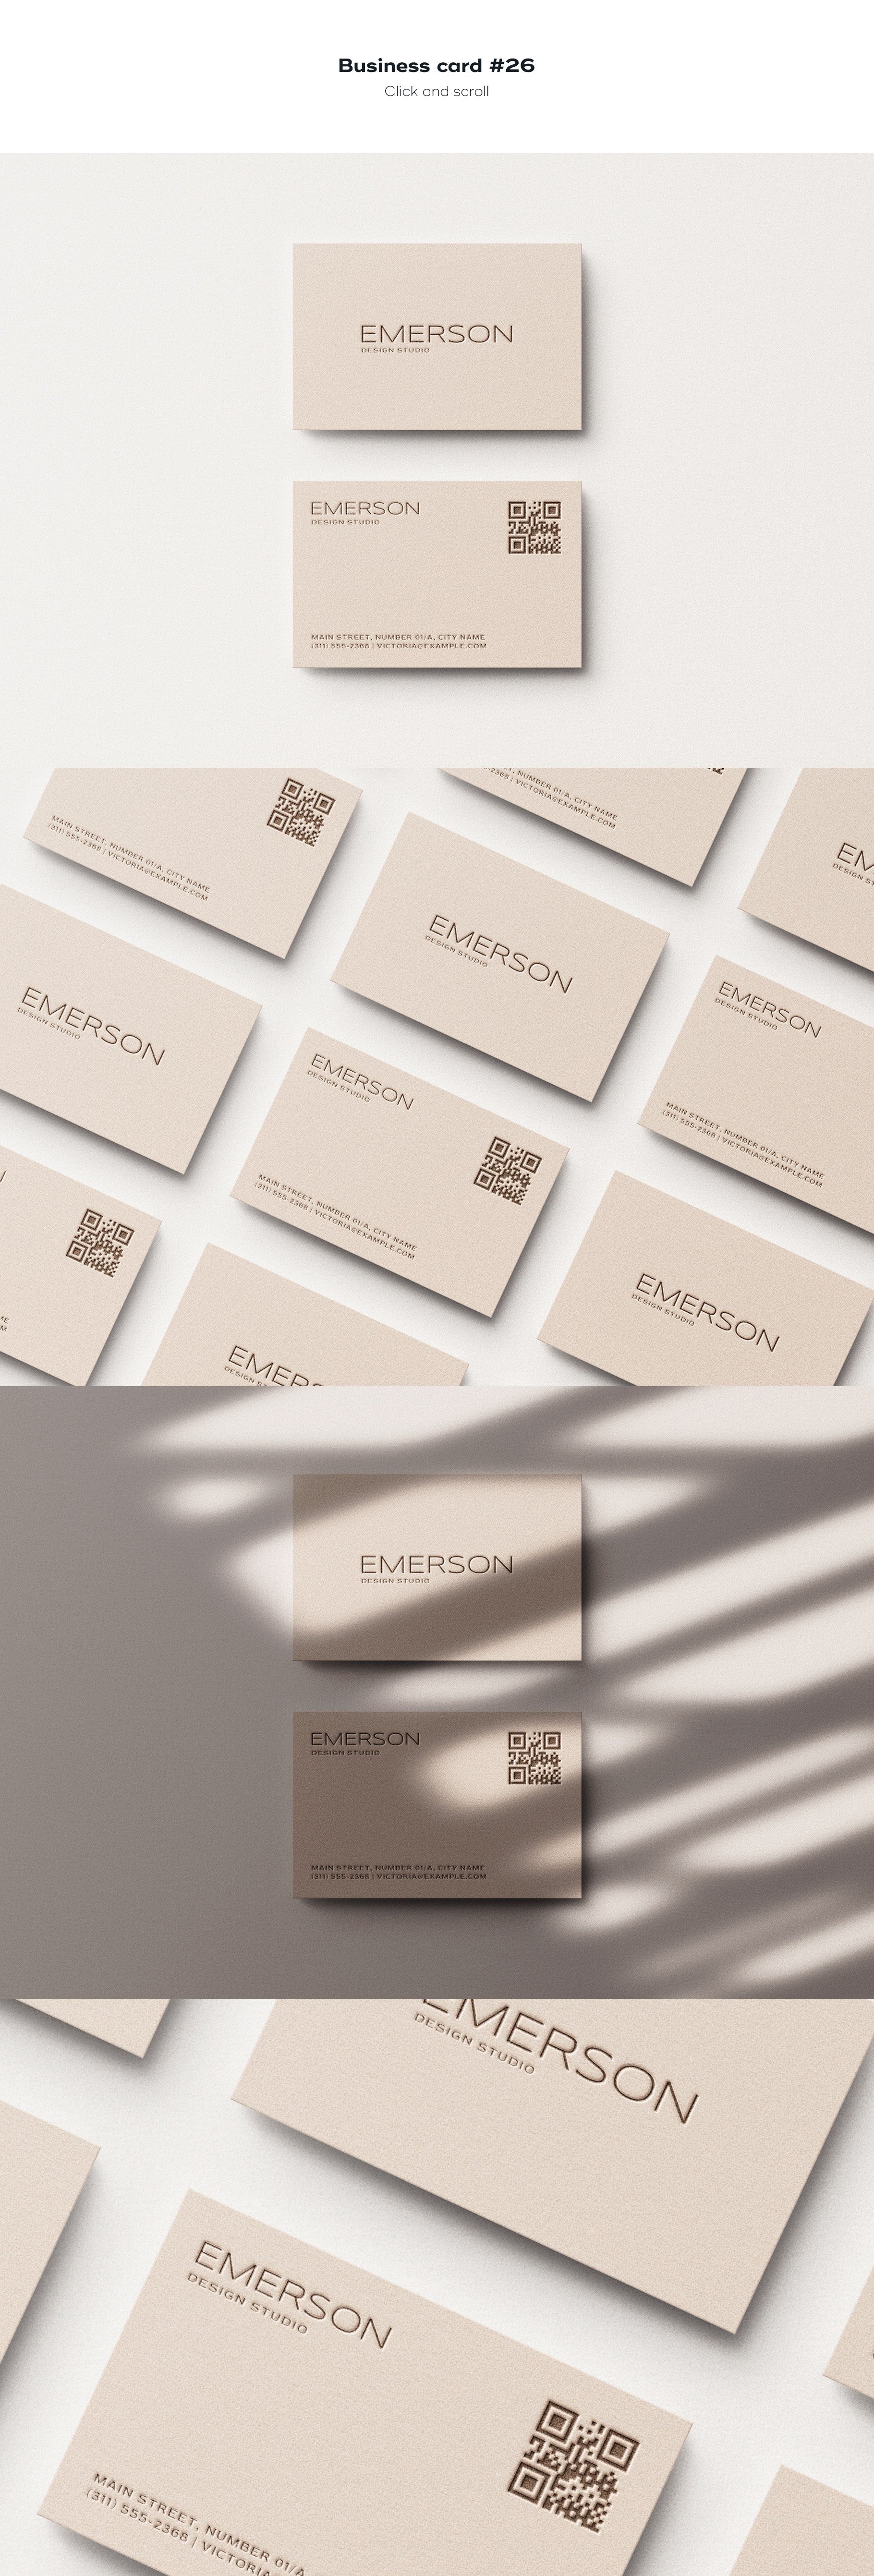 business card 26 174